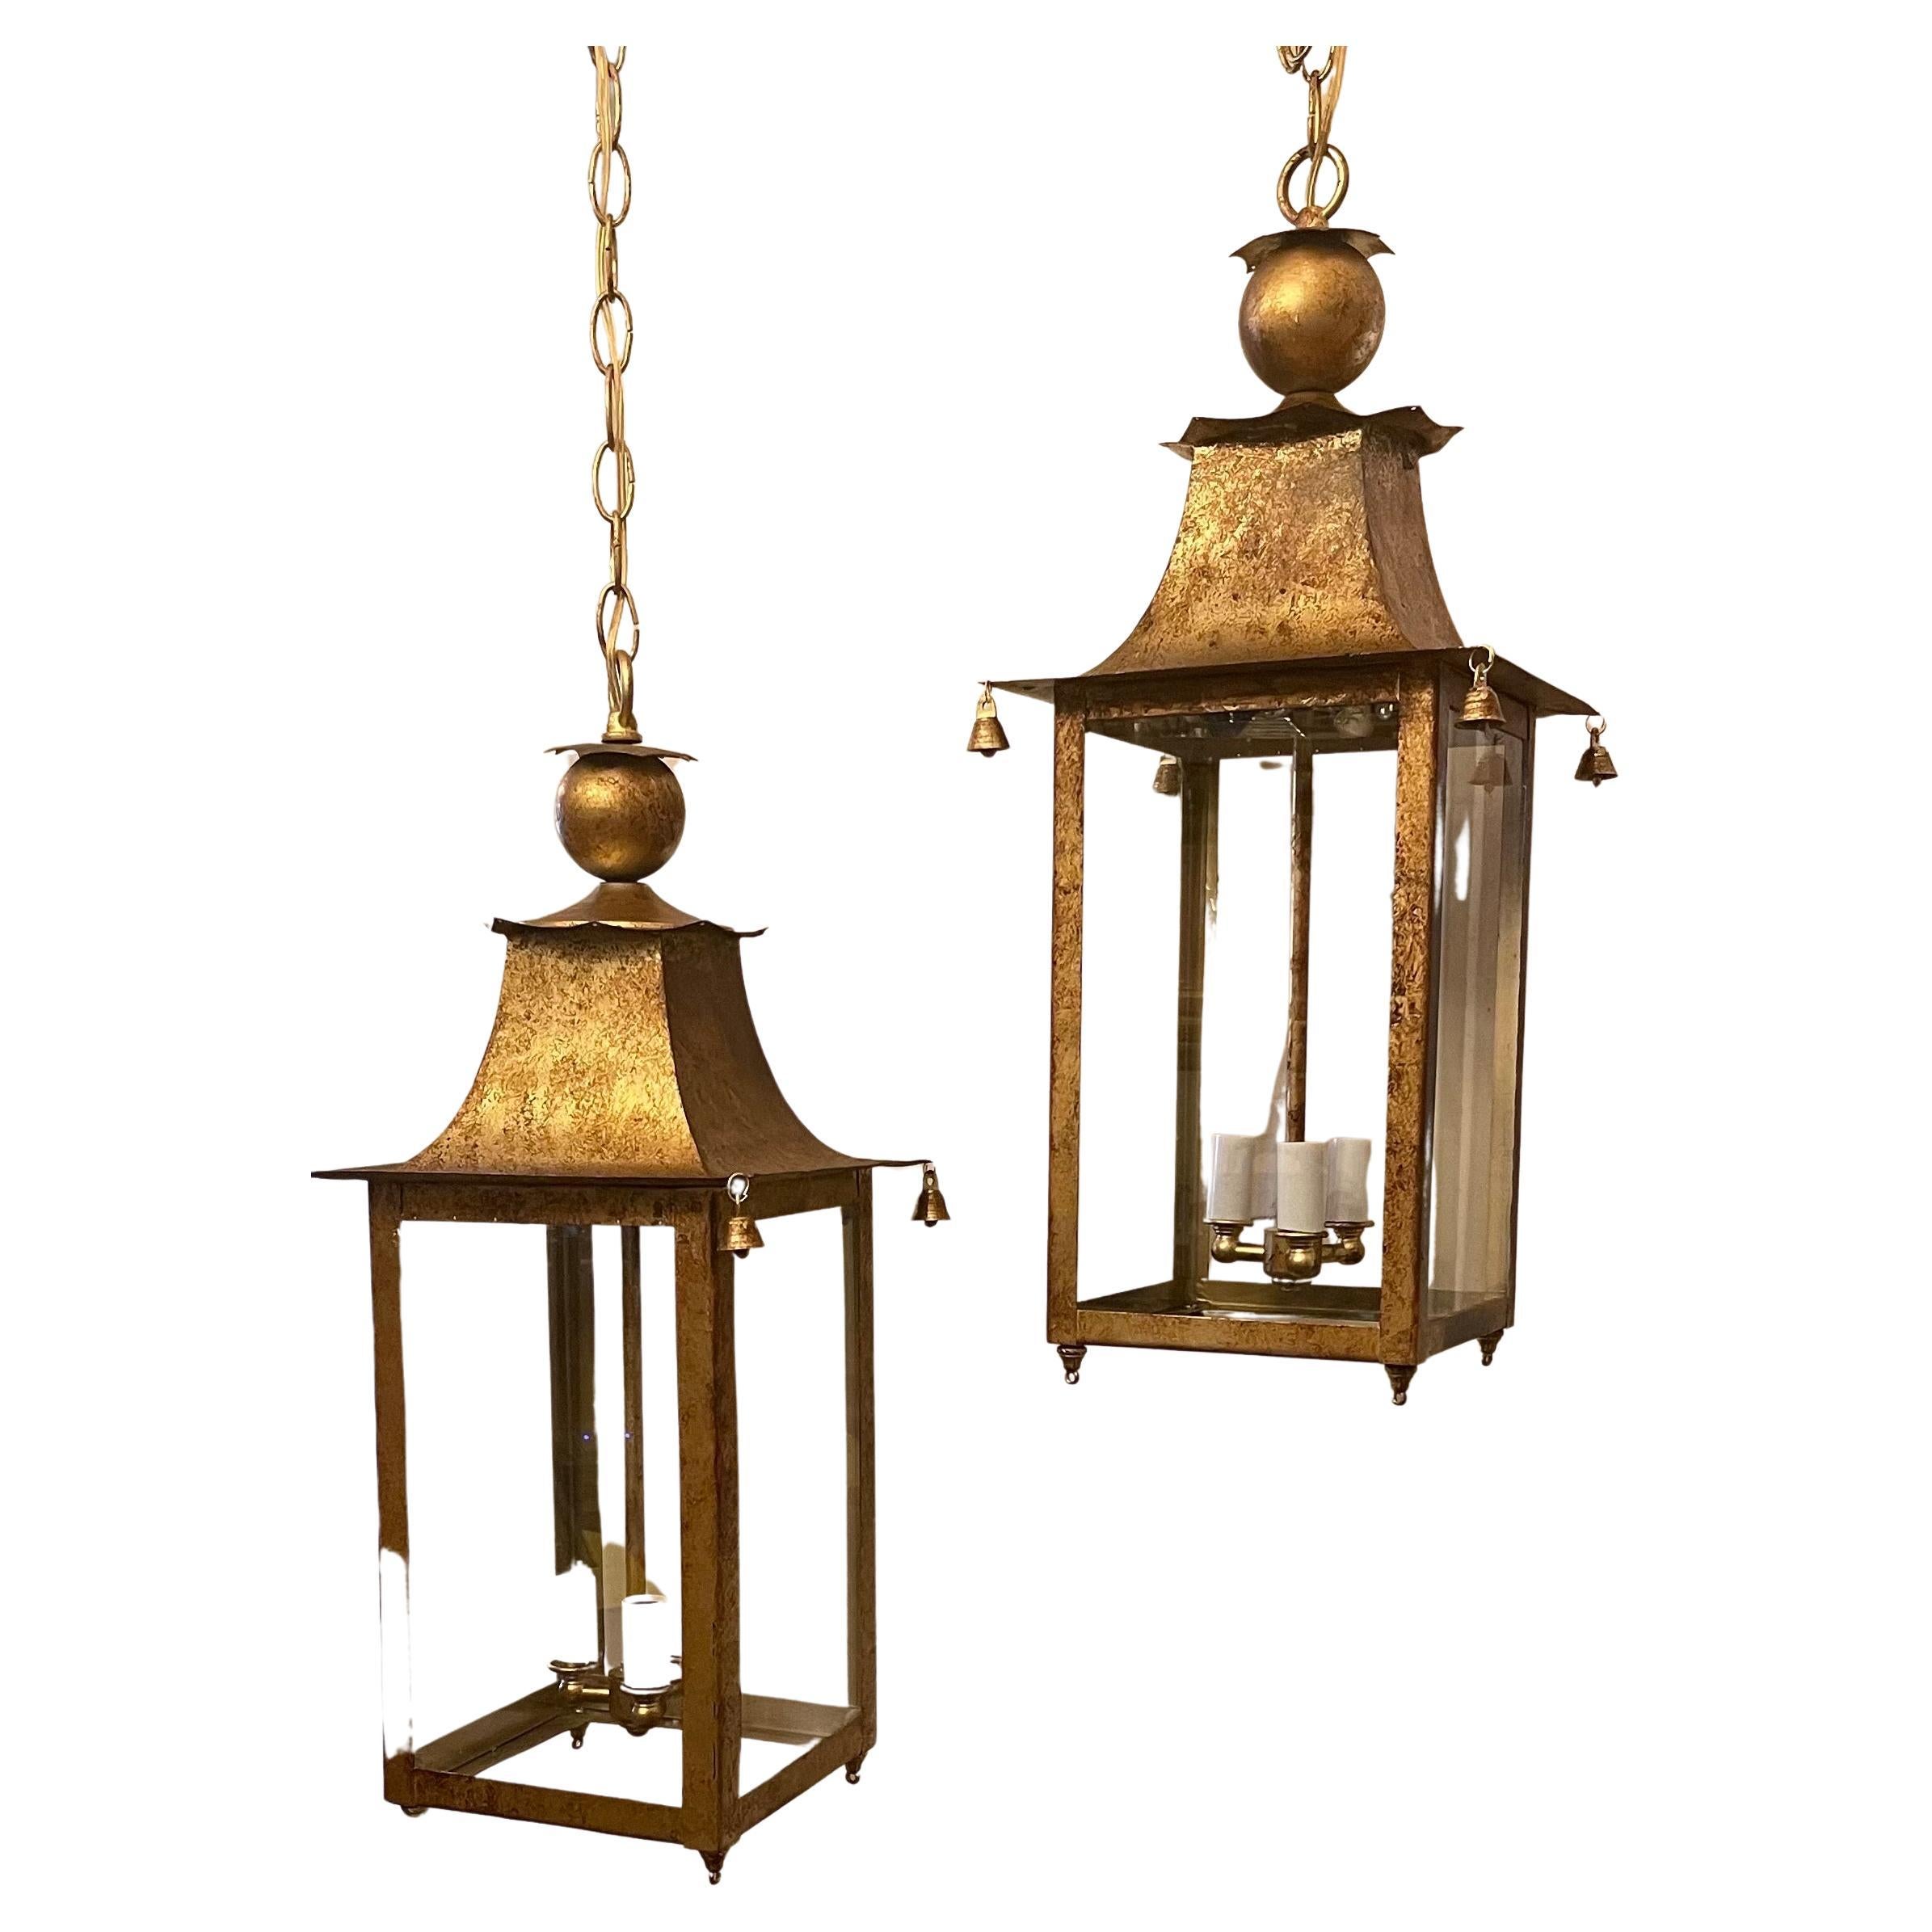 Wonderful Pair Chinoiserie Gold Gilt Pagoda Lantern Bell Chandeliers Fixtures